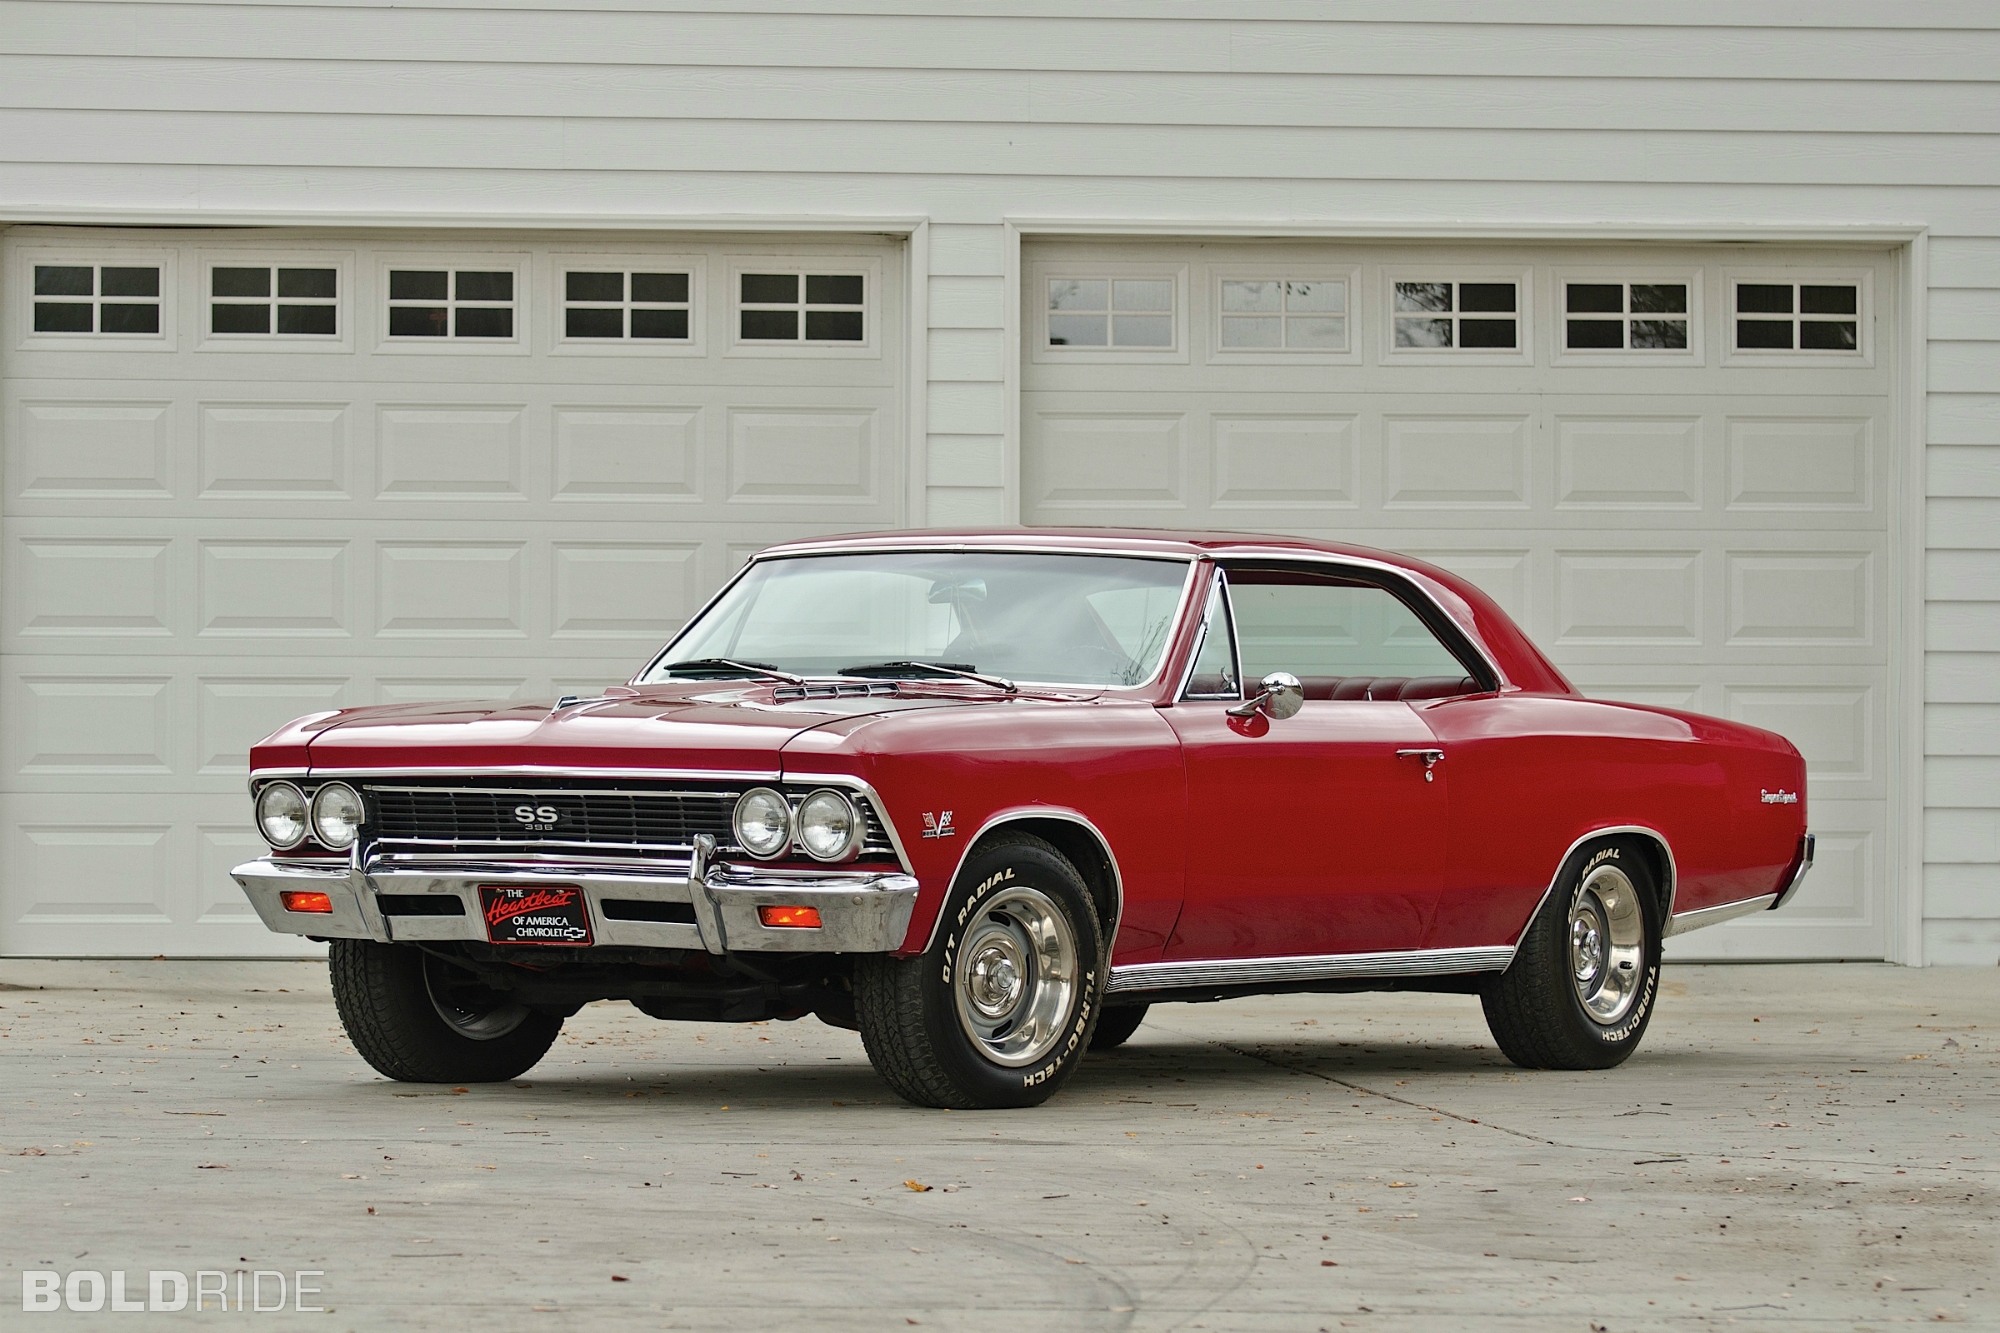 HQ 1966 Chevrolet Chevelle Wallpapers | File 1661.39Kb